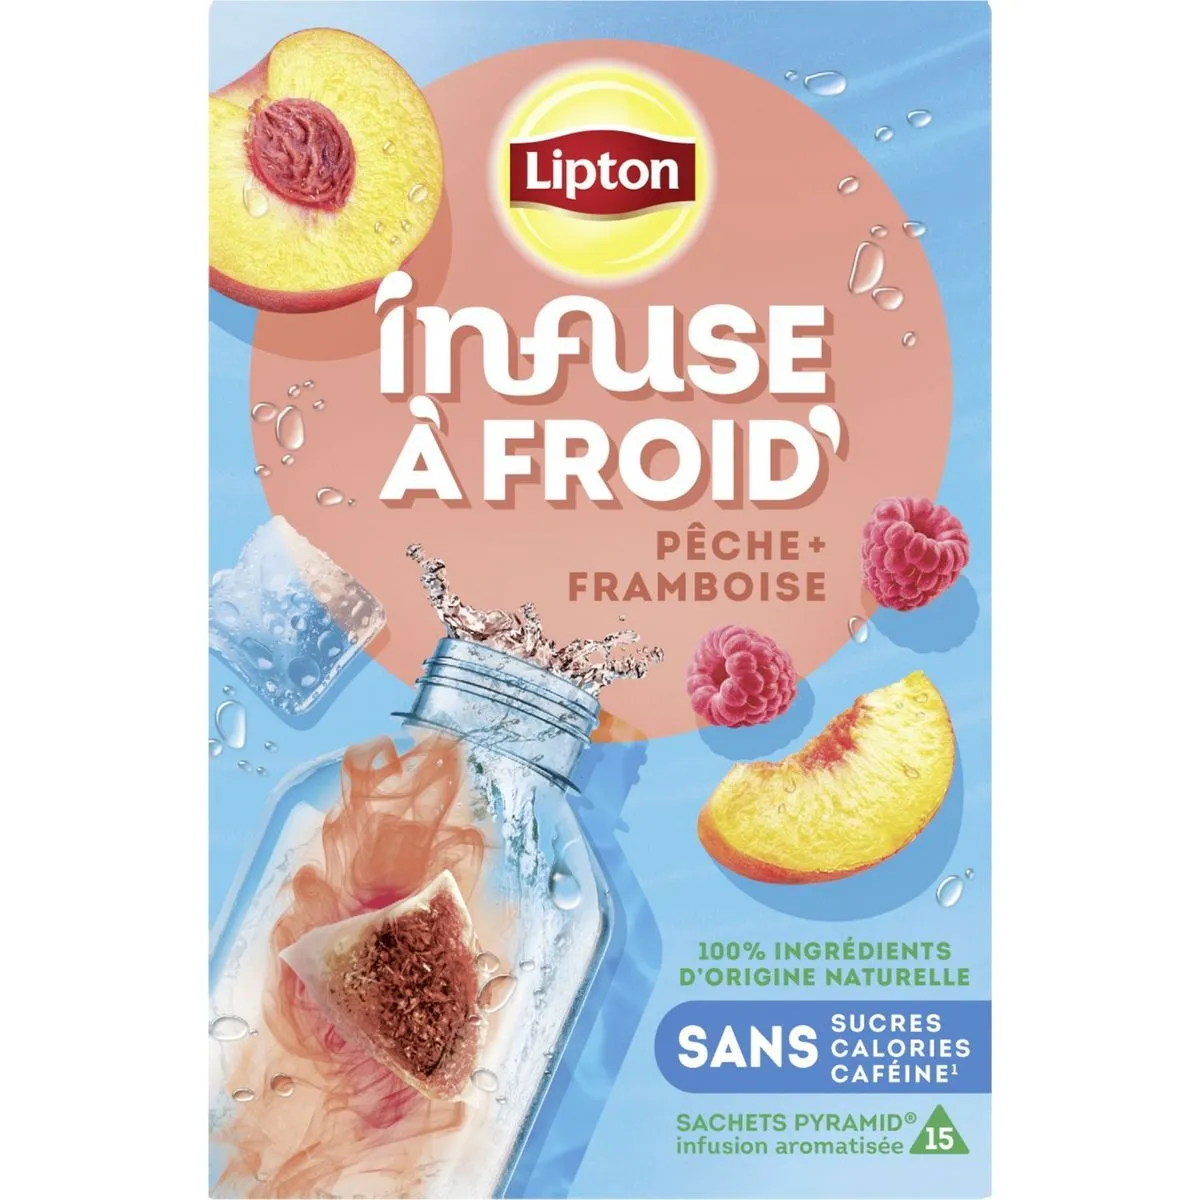 infuse à froid pêche framboise lipton